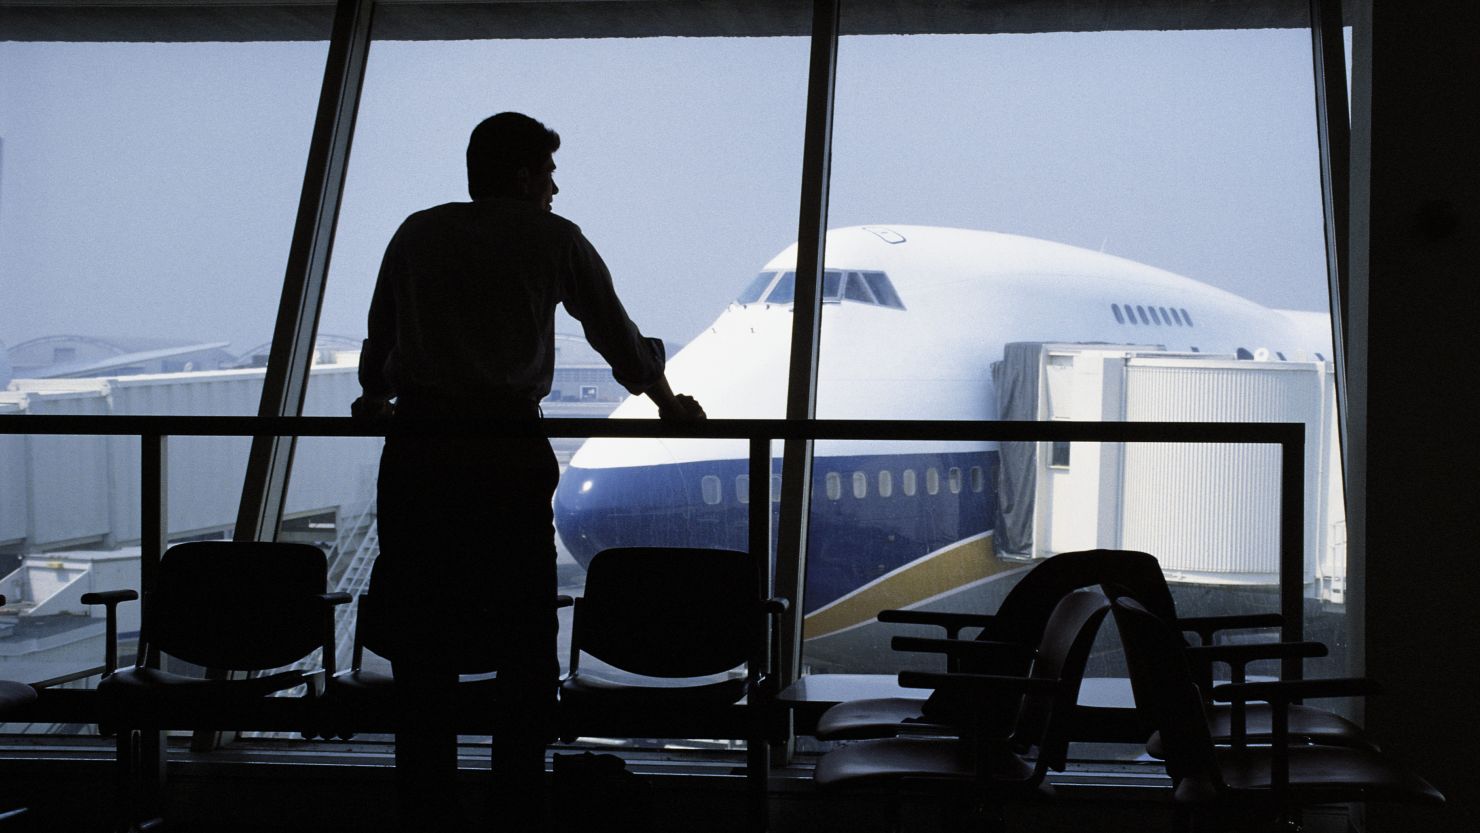 Frequent flier miles can be used to purchase airline tickets and other goods and services.